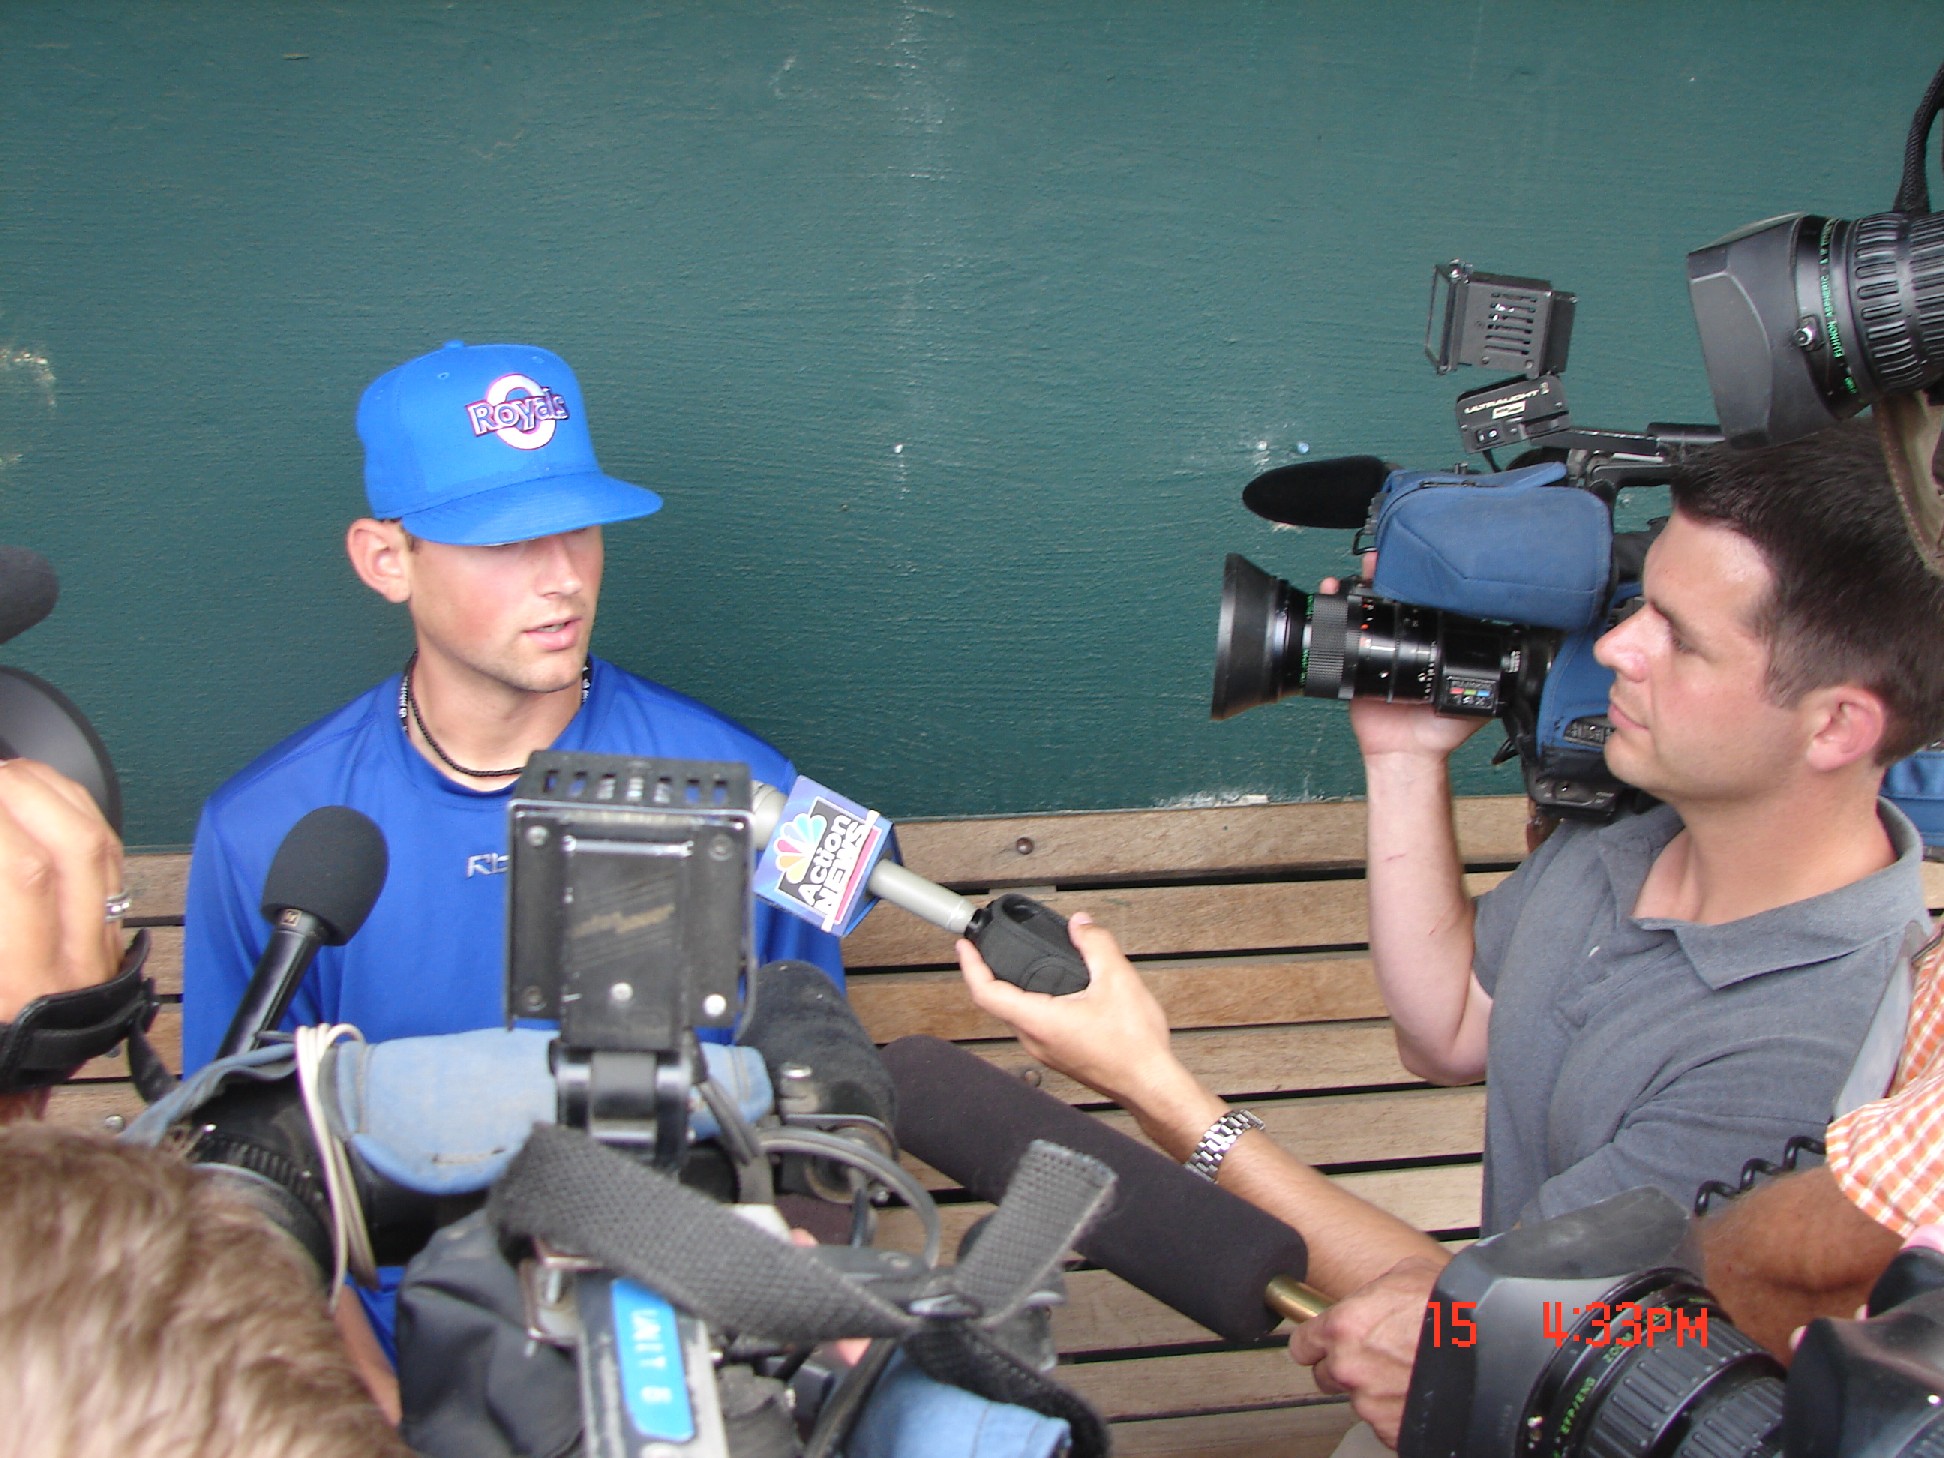 Luke Hochevar talks to reporters after his debut in Omaha on July 15, 2007.